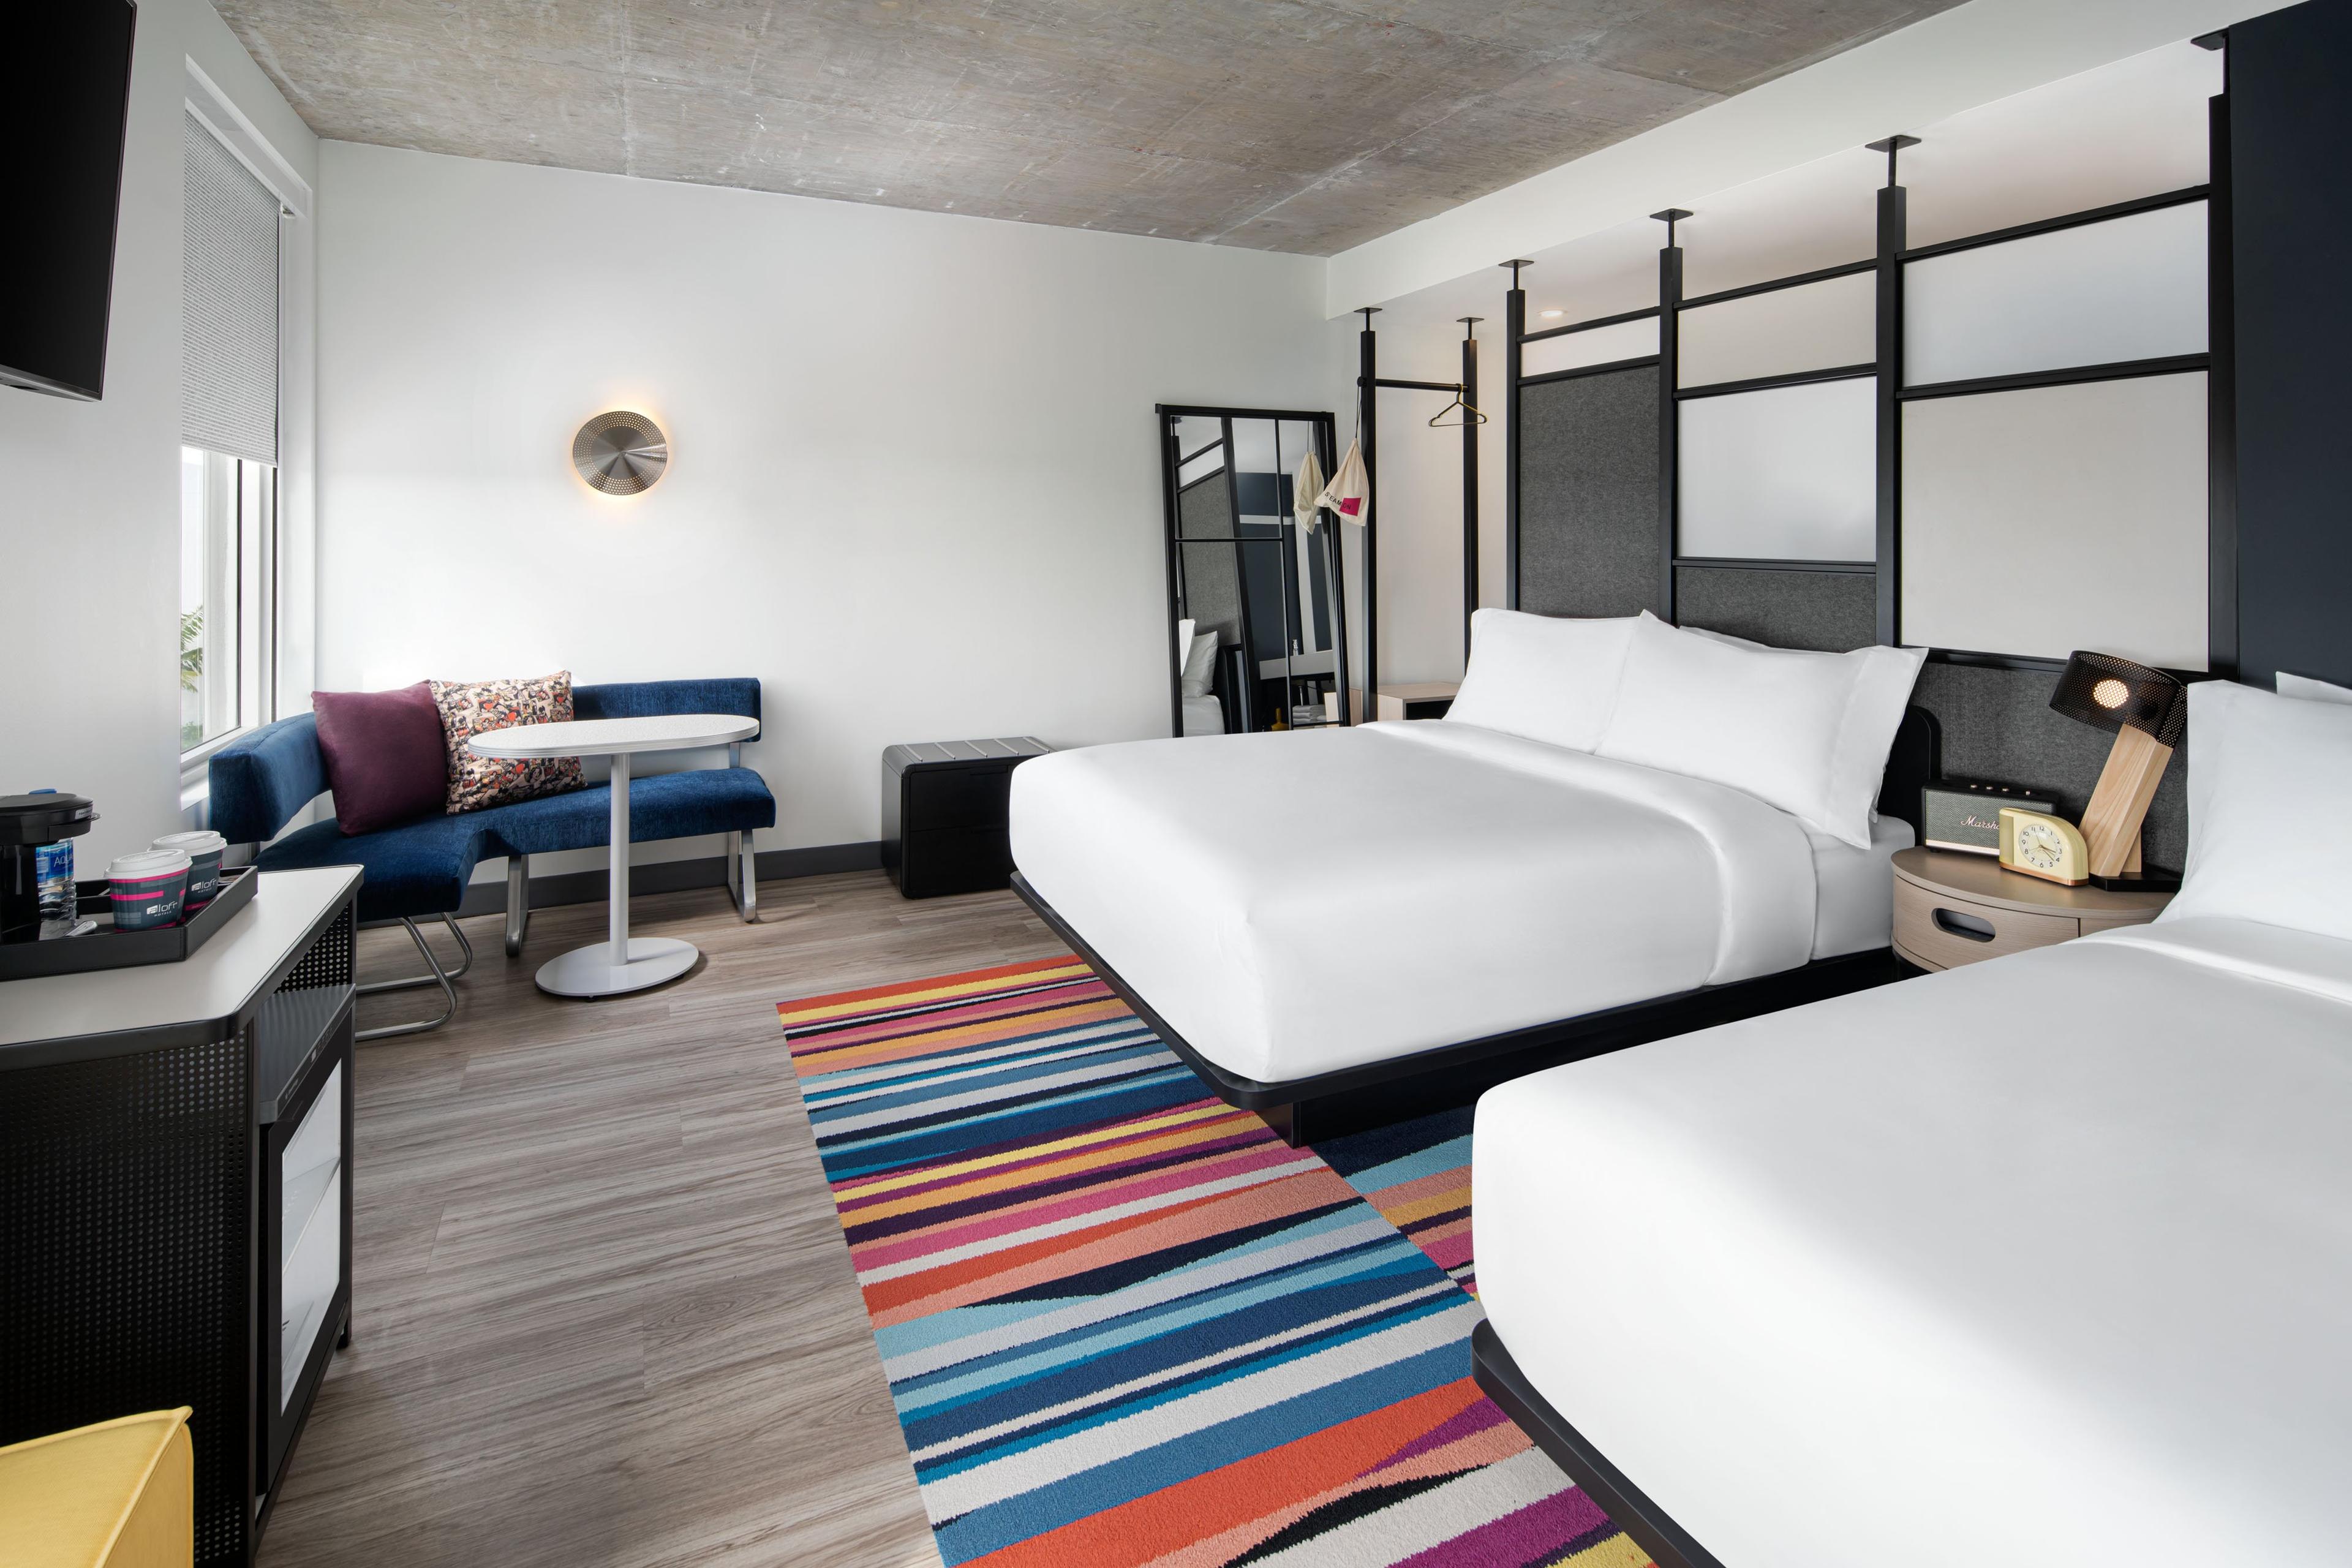 Breeze into one of our Aloft rooms, featuring our ultra-comfortable signature bed, walk-in shower, custom amenities by Bliss® Spa, and more.